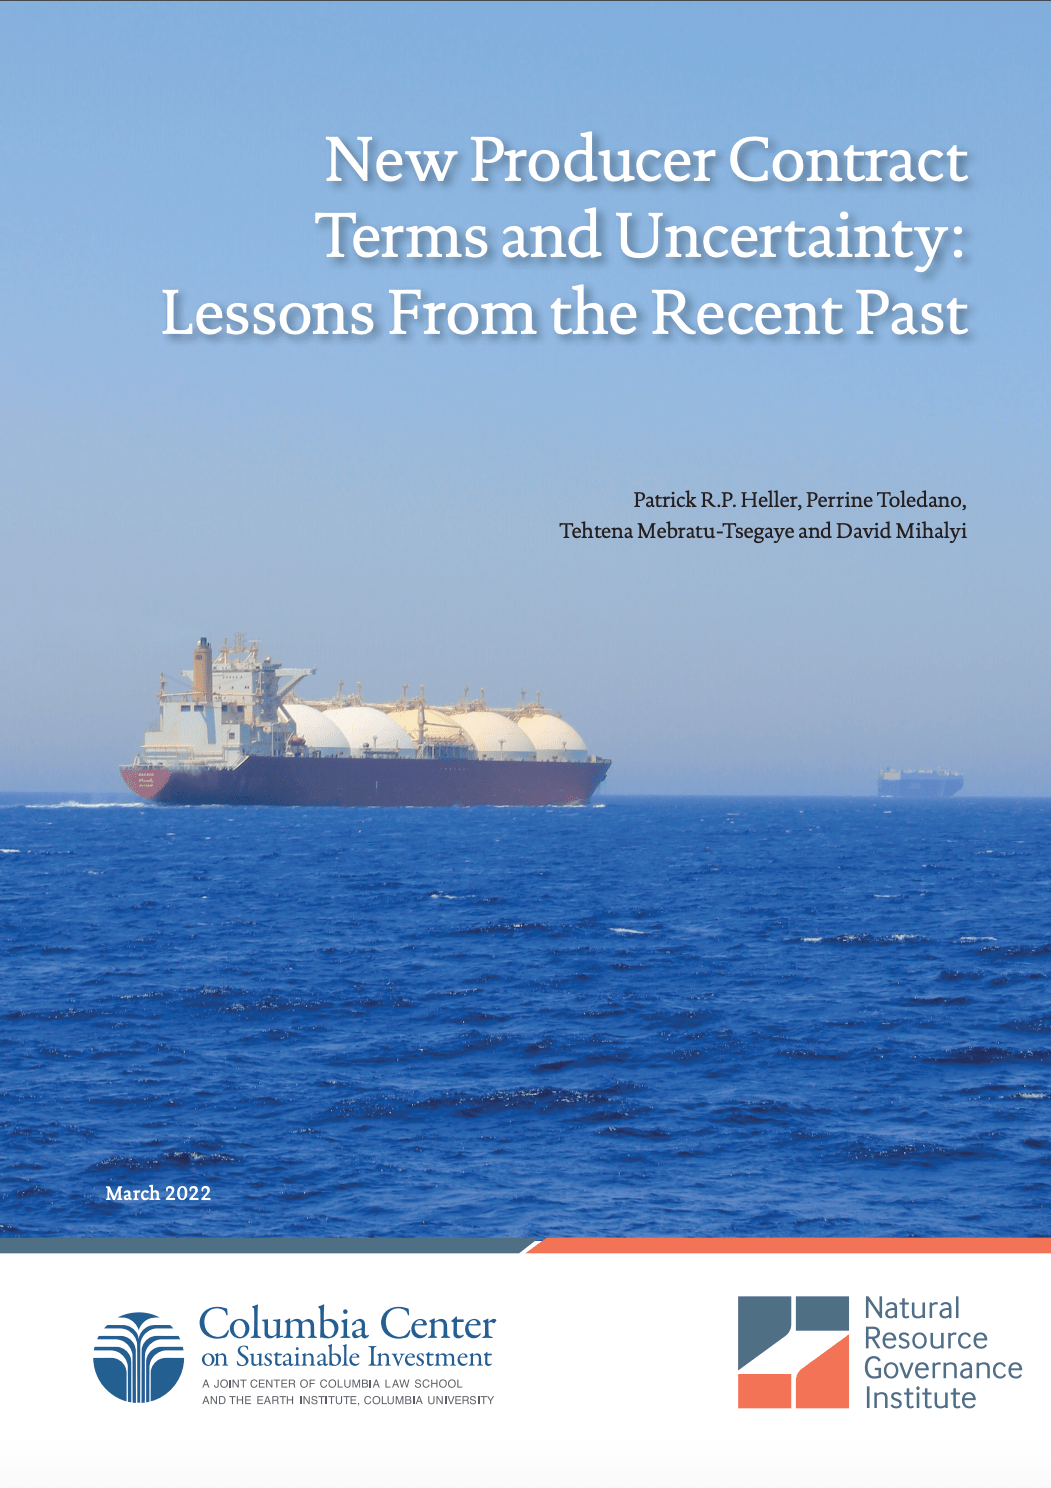 "New Producer Contract Terms and Uncertainty: Lessons From the Recent Past" publication cover